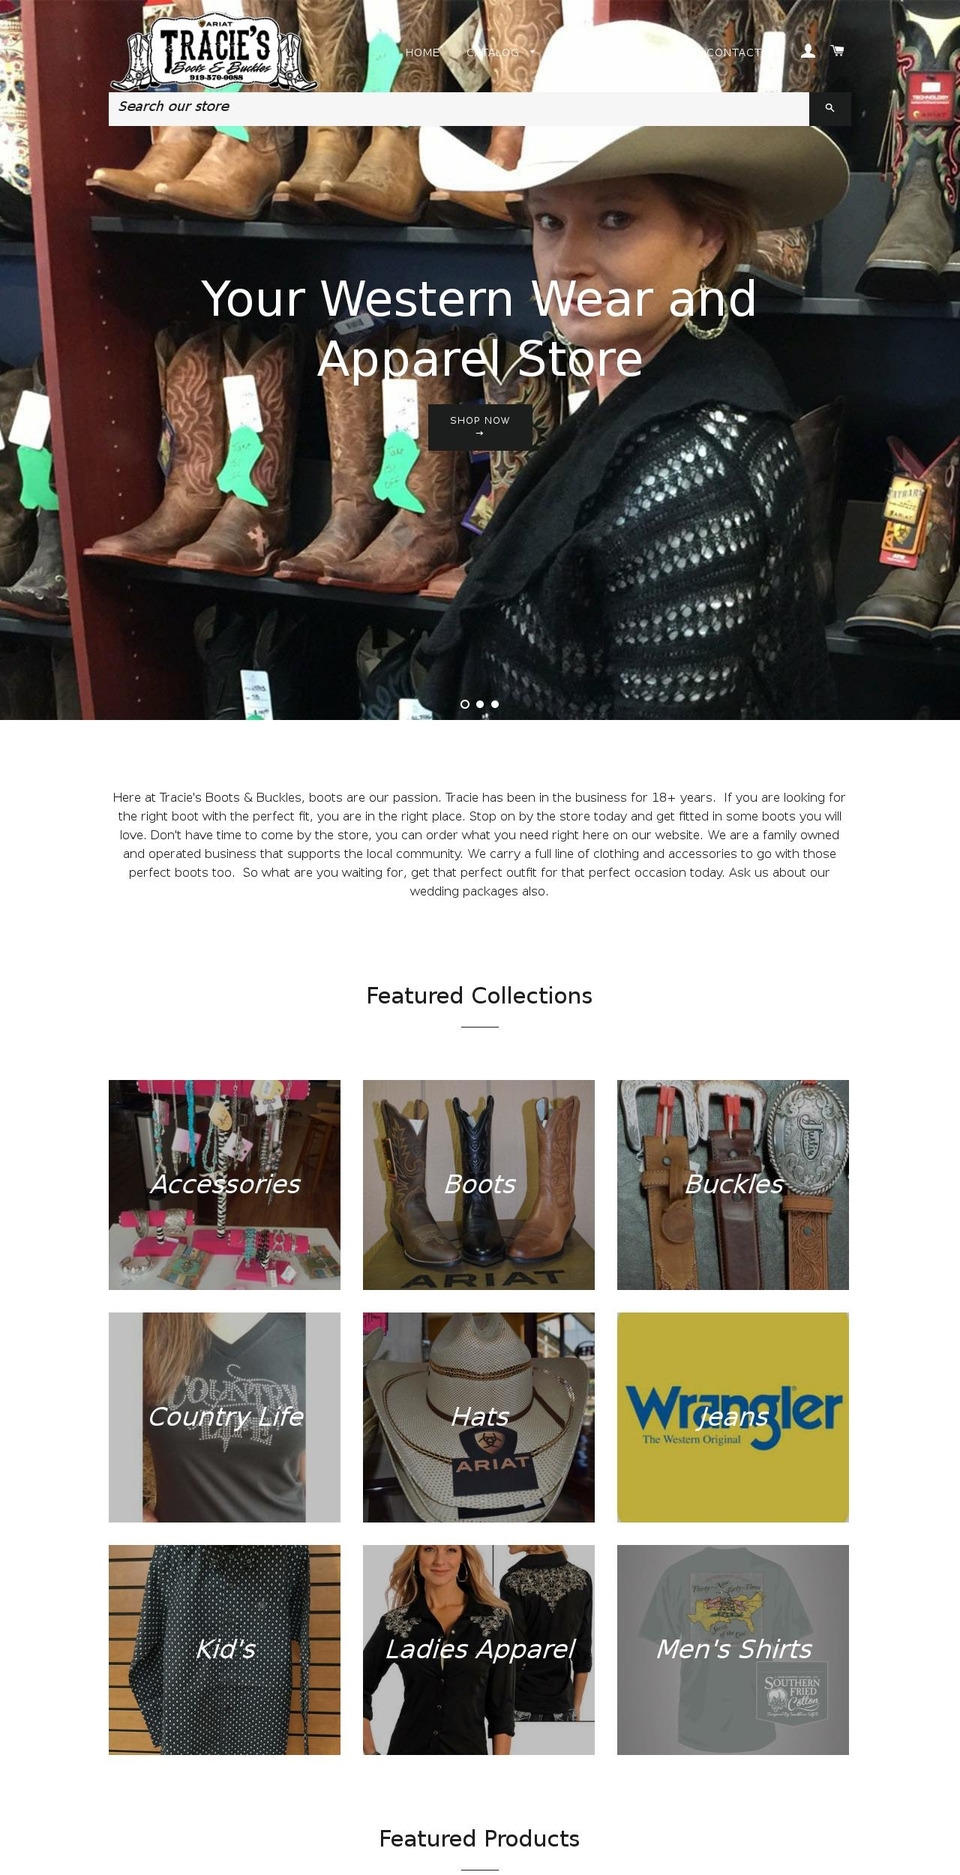 Galleria Shopify theme site example traciesbootsandbuckles.com